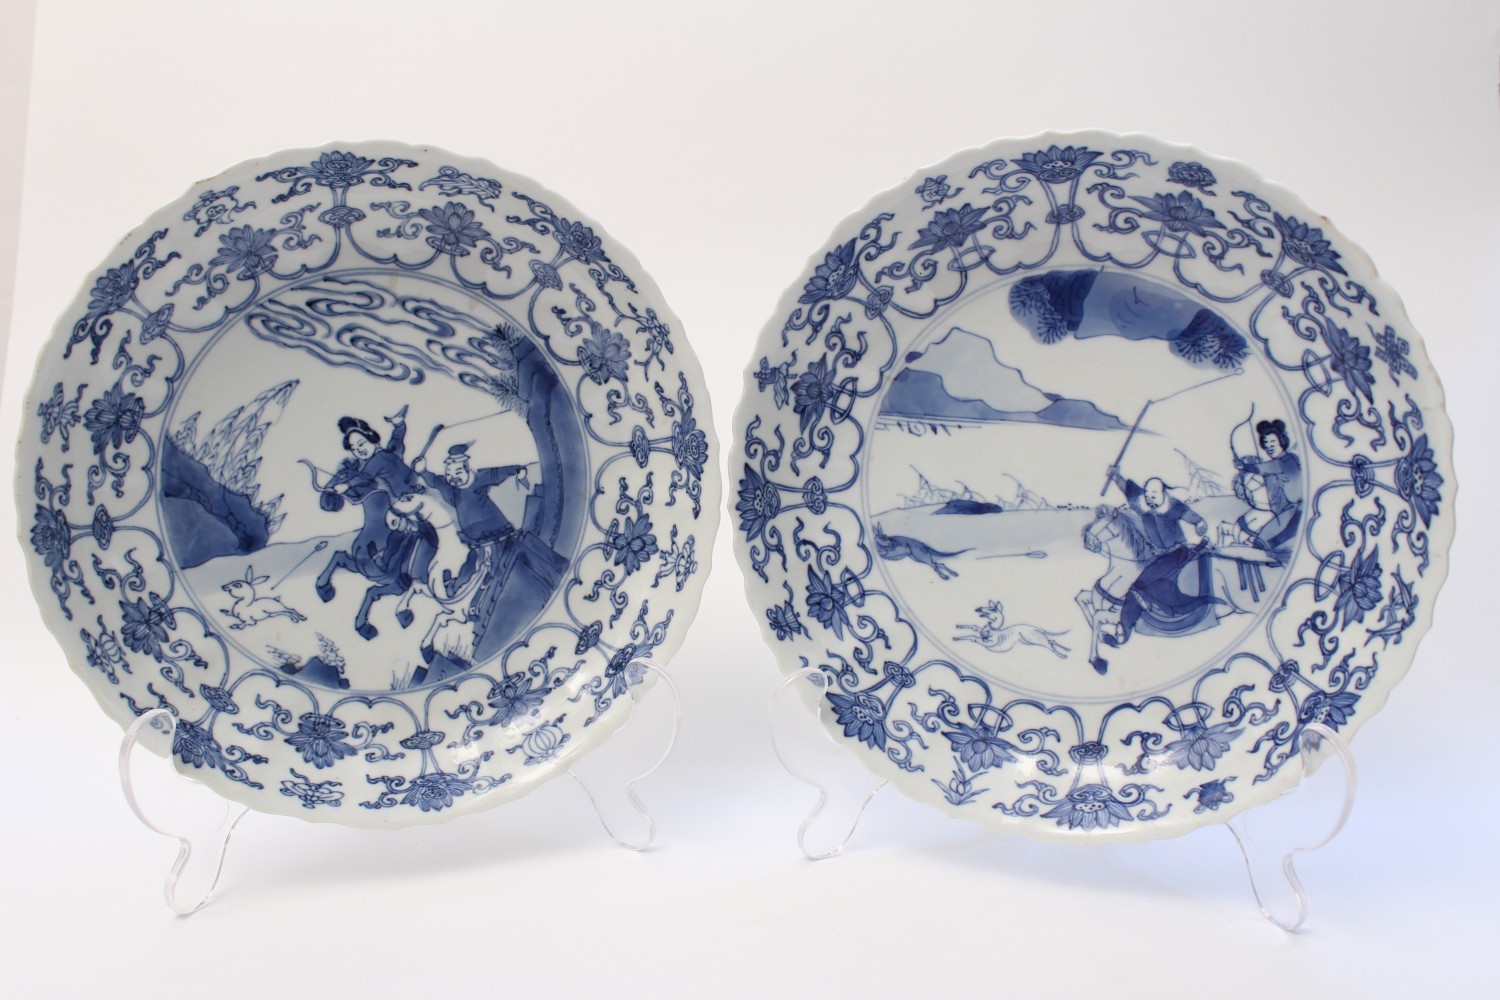 A pair of 'hunt' dishes